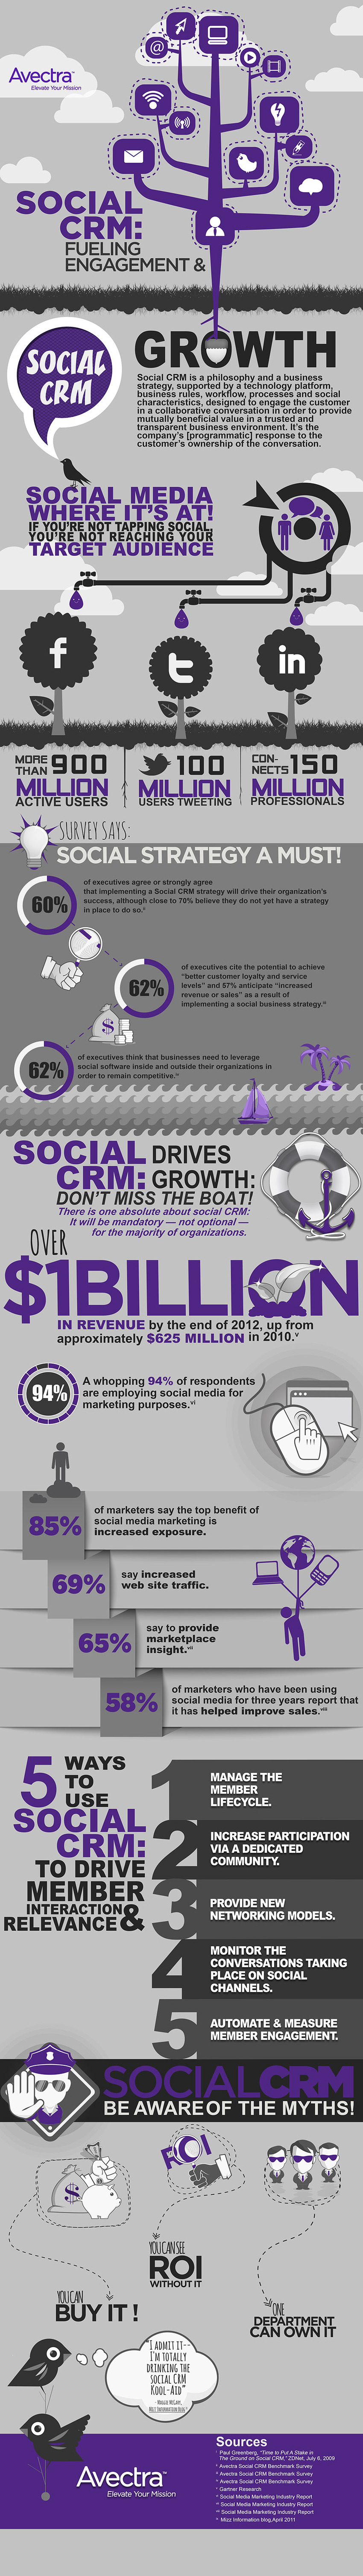 SocialFish | Social CRM Fuels Engagement and Growth [Infographic] | The MarTech Digest | Scoop.it